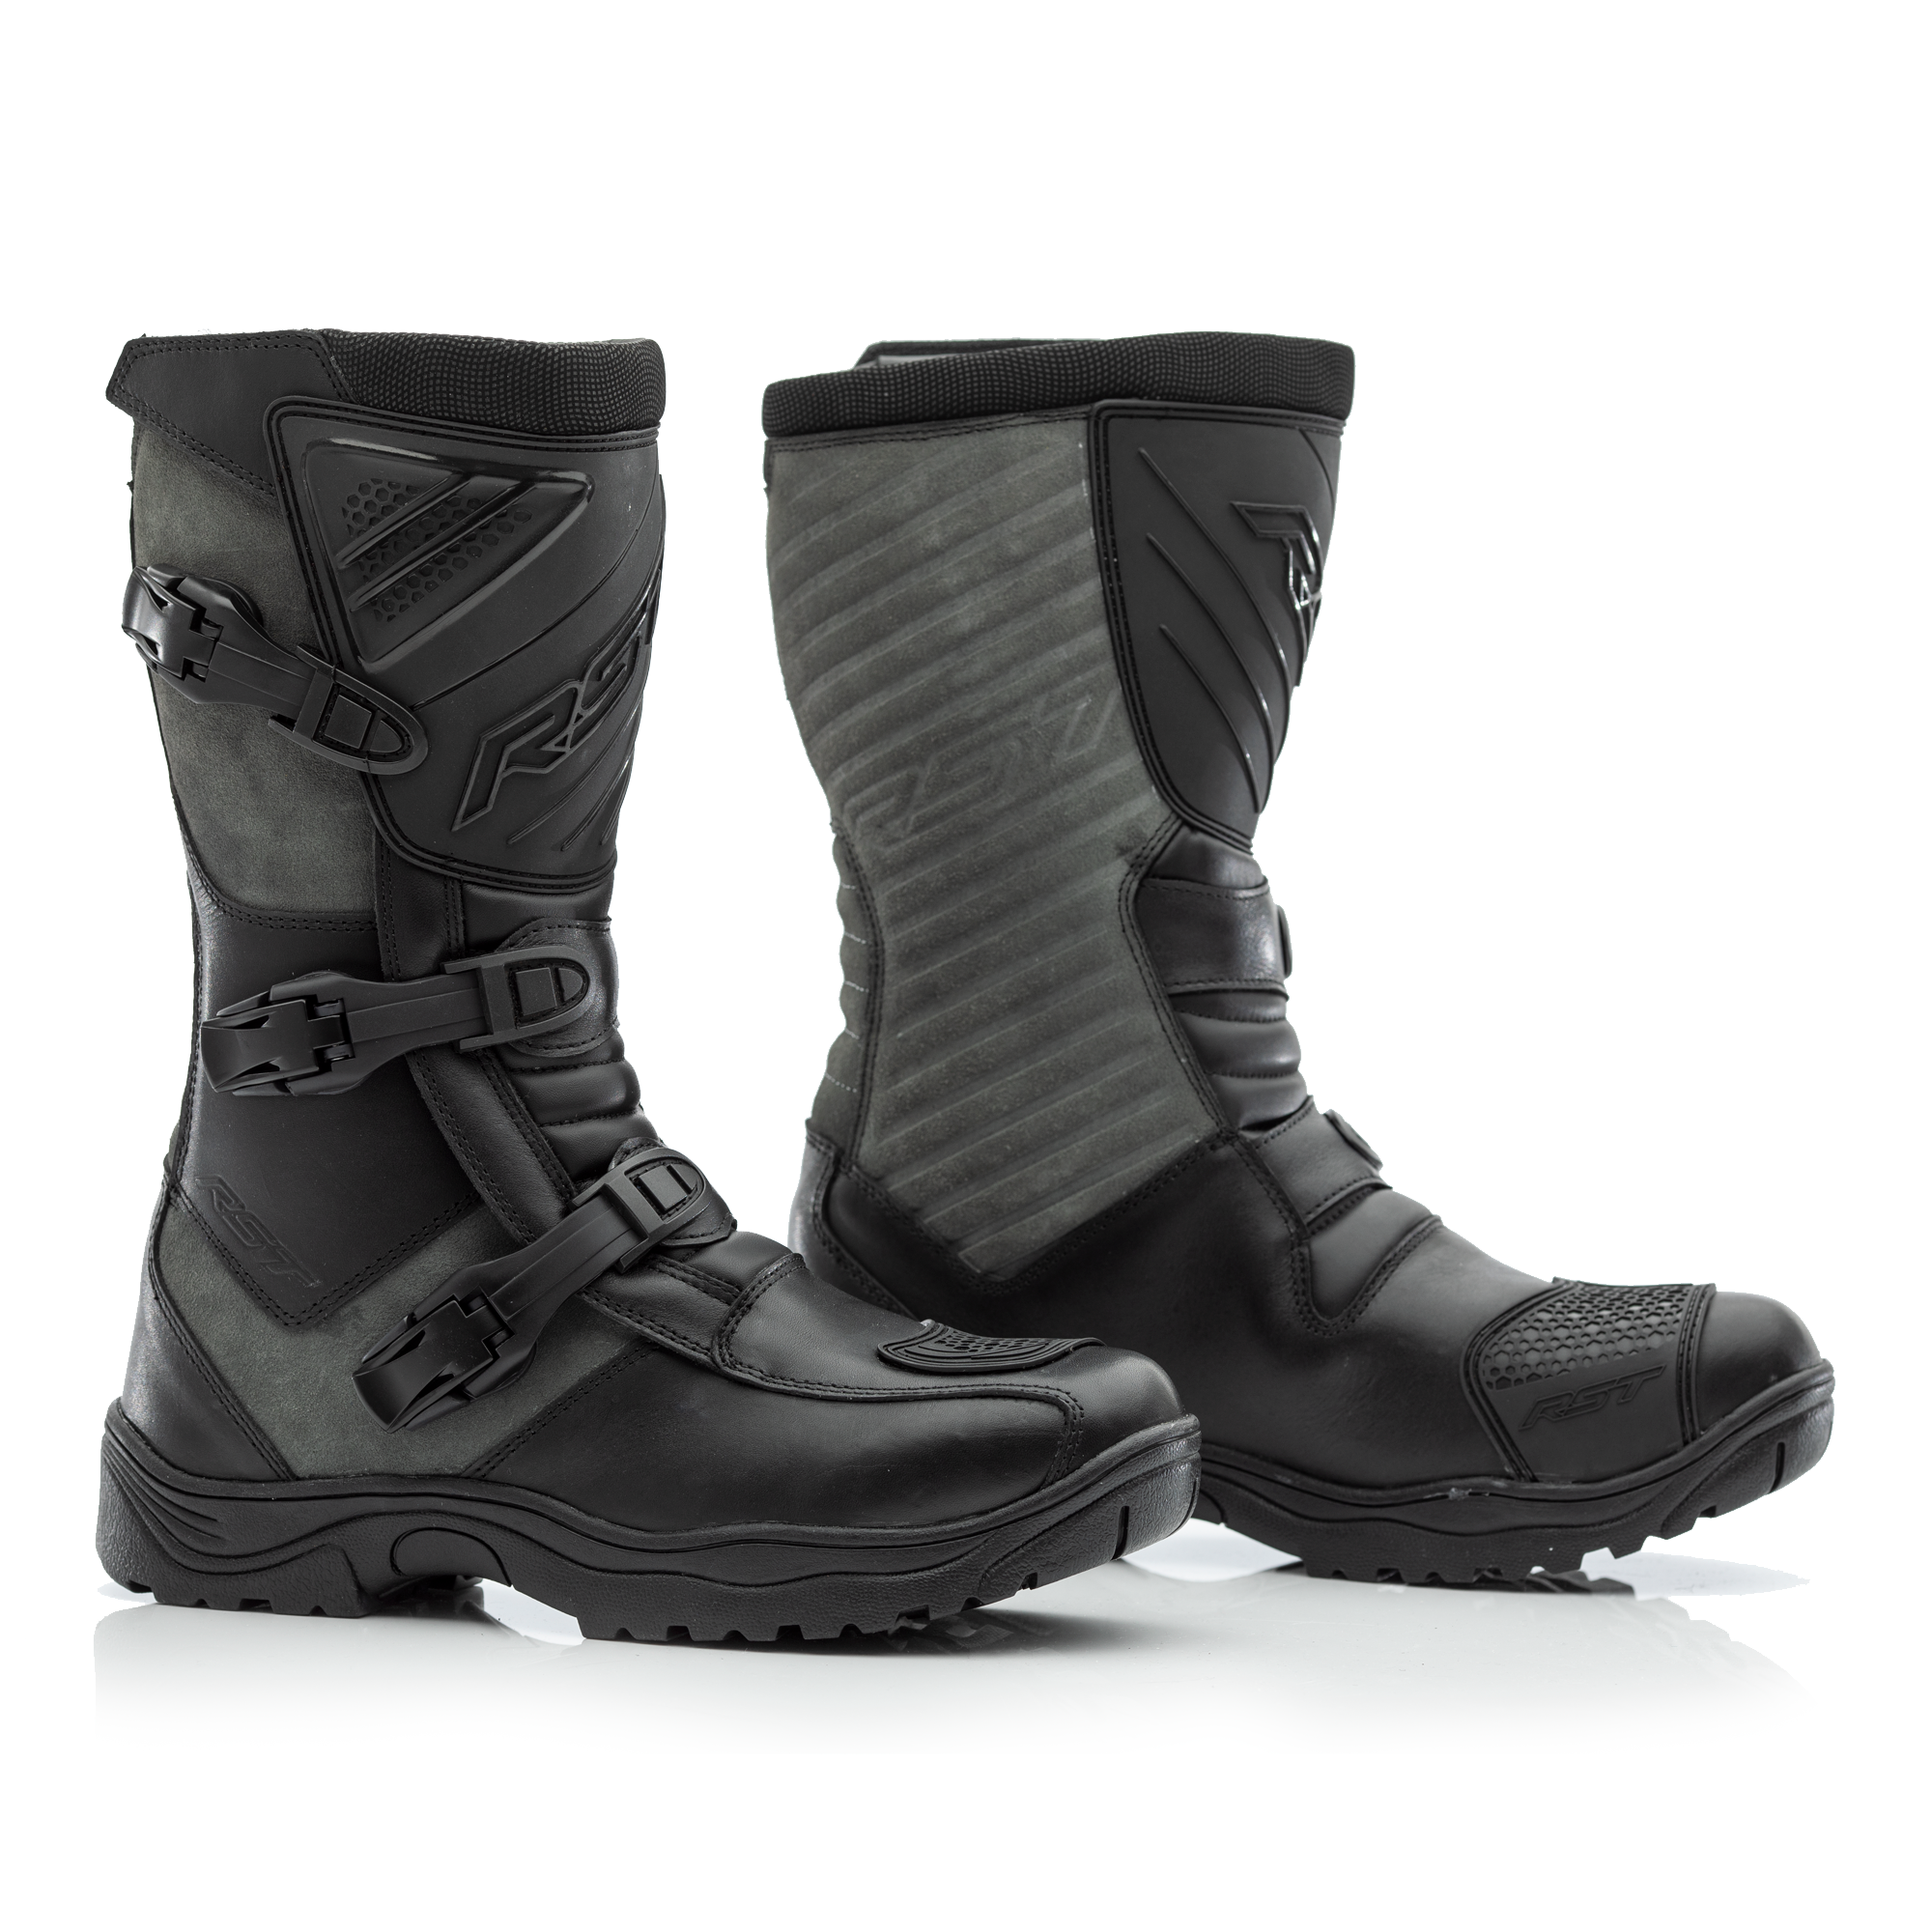 RST Raid CE Boots - Black / Grey | Two Wheel Centre | FREE UK DELIVERY